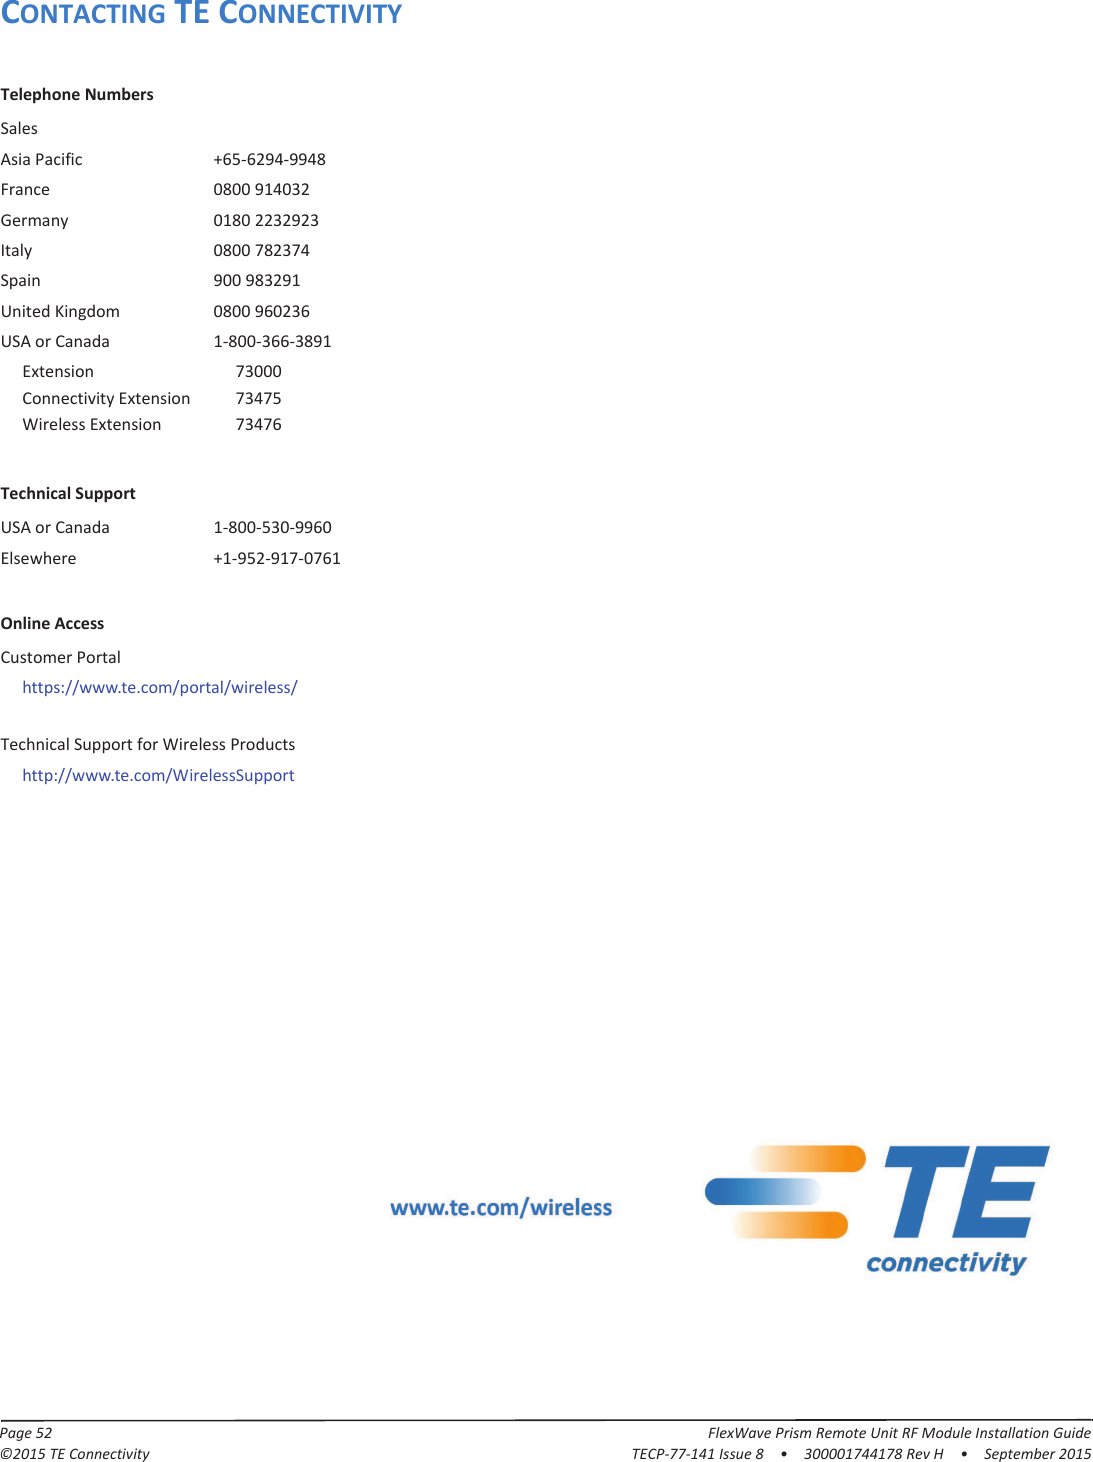 Page 52 FlexWave Prism Remote Unit RF Module Installation Guide©2015 TE Connectivity TECP-77-141 Issue 8  •  300001744178 Rev H  •  September 2015CONTACTING TE CONNECTIVITYTelephone NumbersSalesAsia Pacific +65-6294-9948France 0800 914032Germany 0180 2232923Italy 0800 782374Spain 900 983291United Kingdom 0800 960236USA or Canada 1-800-366-3891Extension 73000Connectivity Extension 73475Wireless Extension 73476Technical SupportUSA or Canada 1-800-530-9960Elsewhere +1-952-917-0761Online AccessCustomer Portalhttps://www.te.com/portal/wireless/Technical Support for Wireless Productshttp://www.te.com/WirelessSupport 